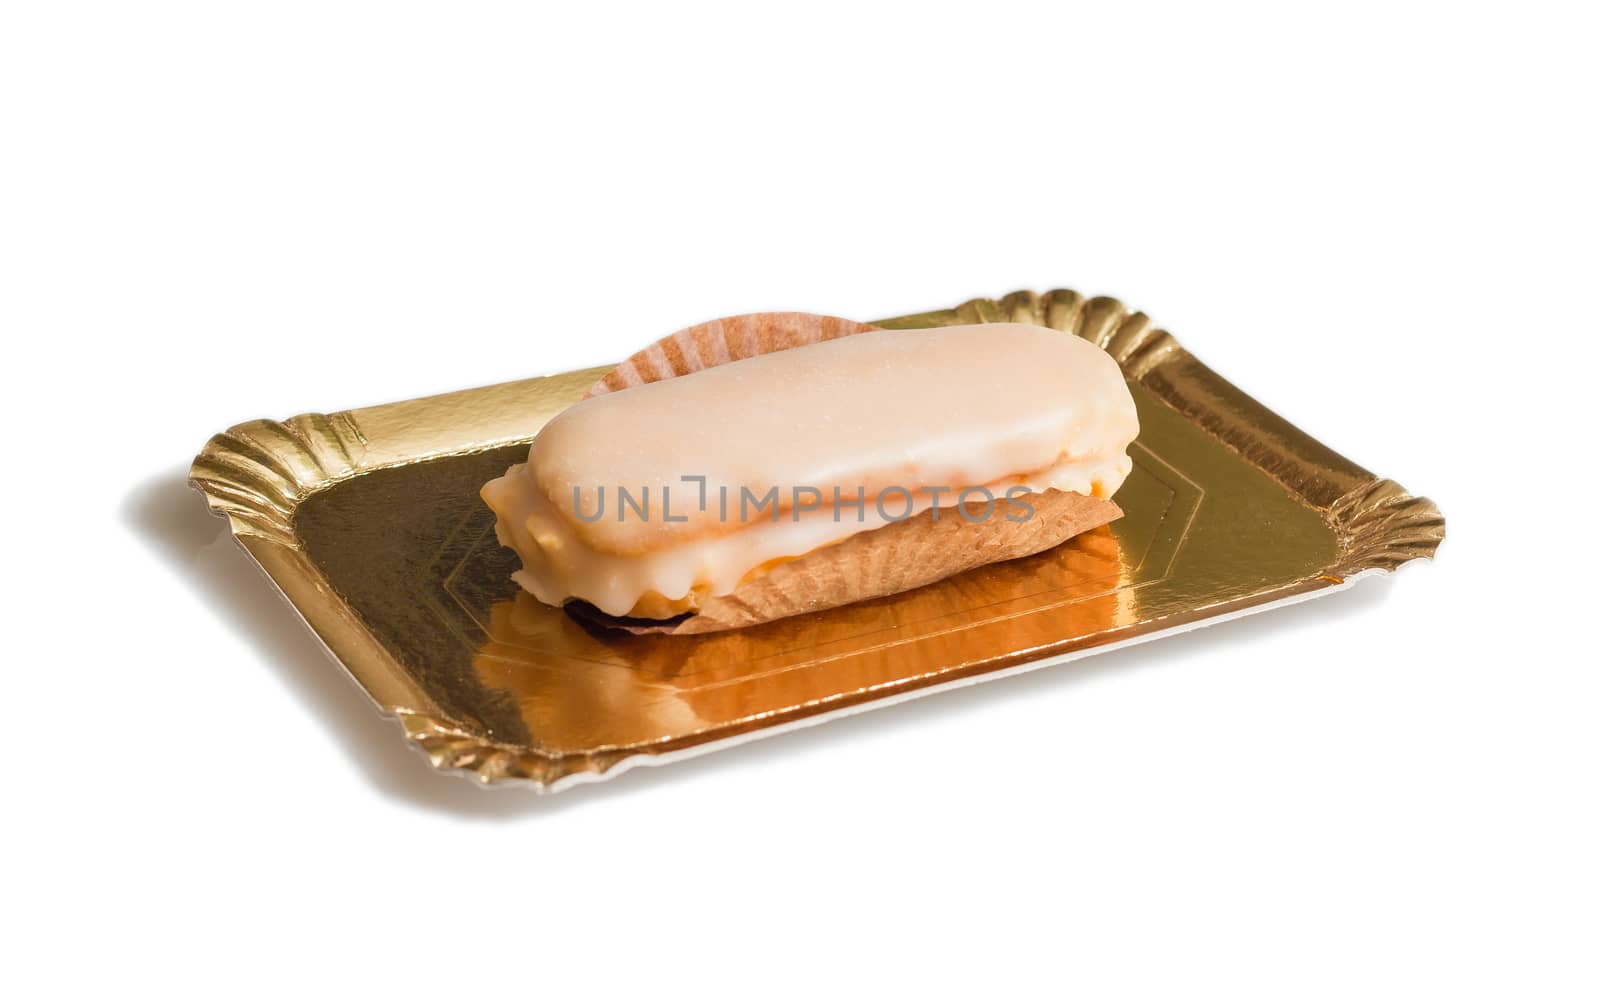 Delicious traditional asturian almond cake with sugar frosting and known as "carbayon", isolated on white background